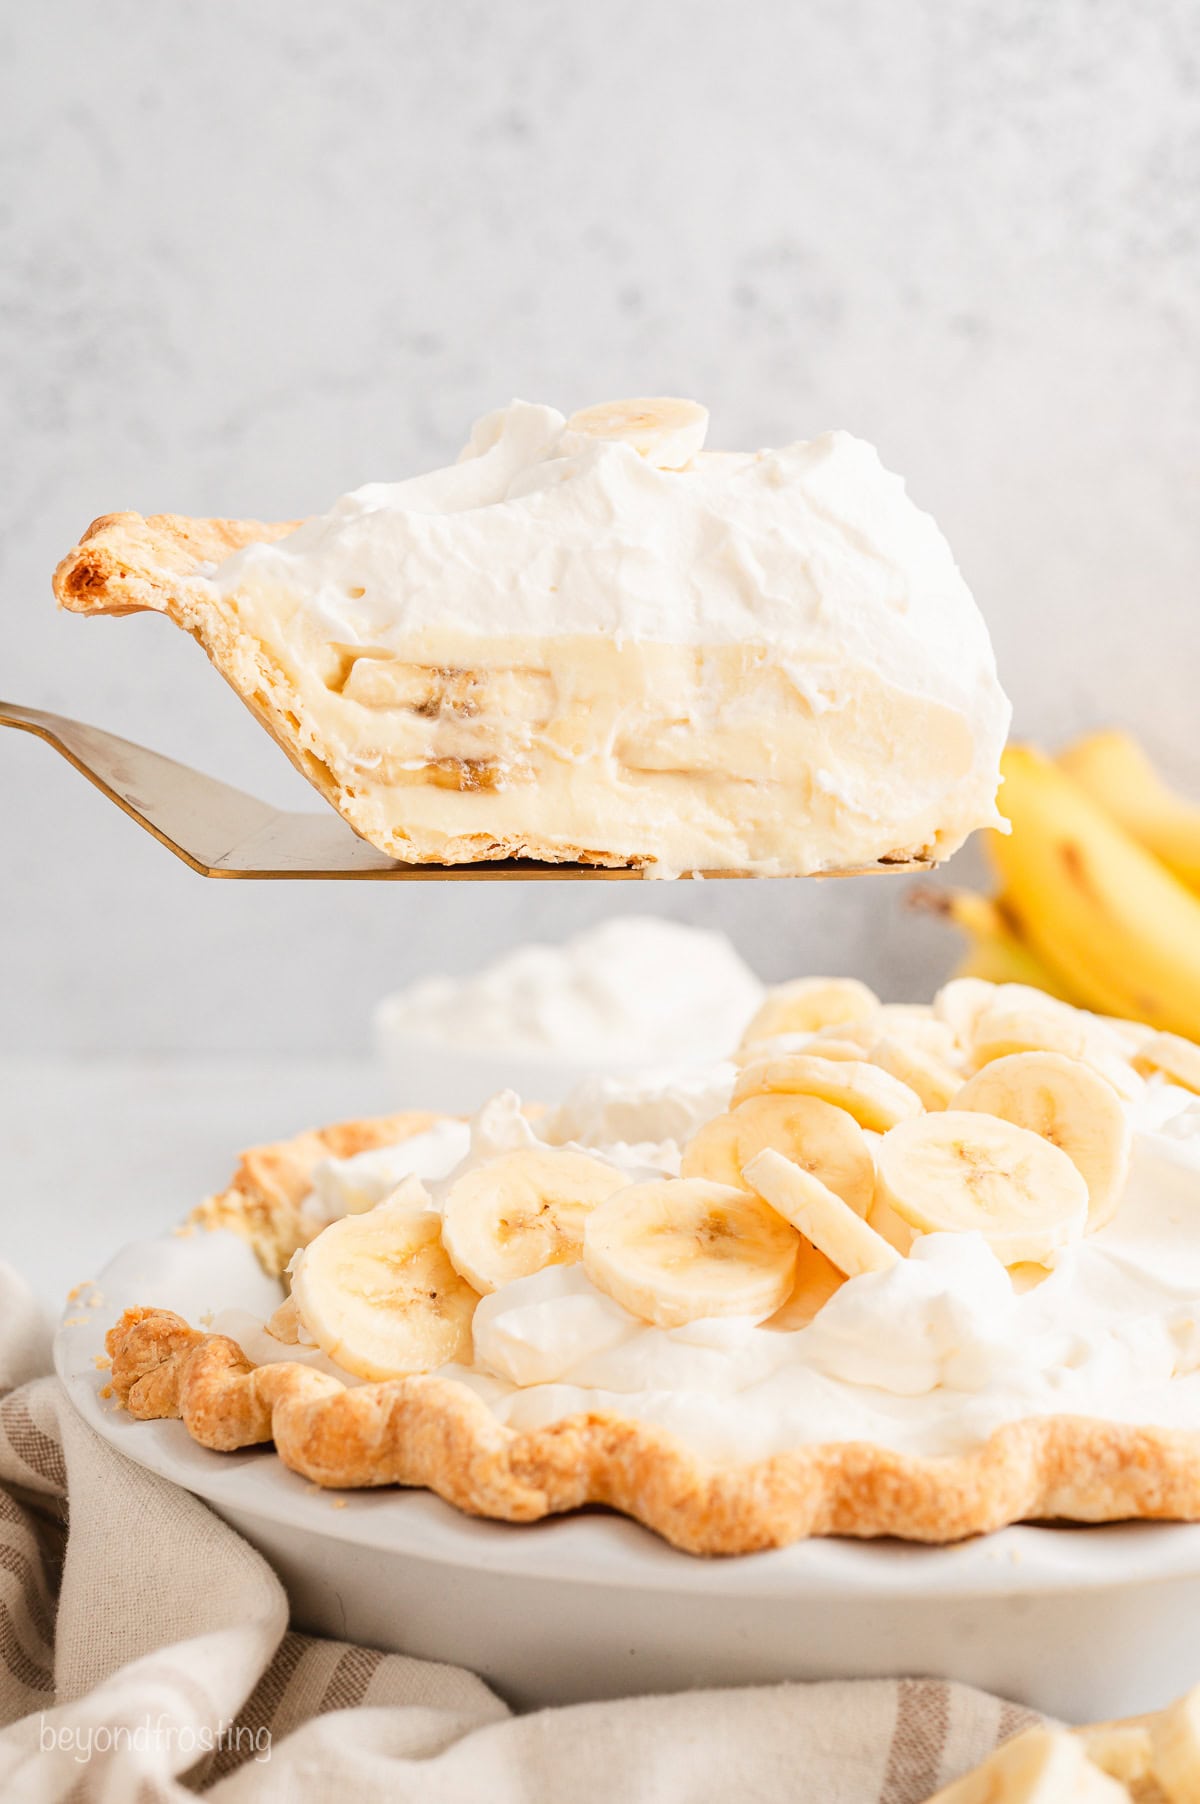 A slice of banana cream pie lifted from the rest of the pie with a cake server.